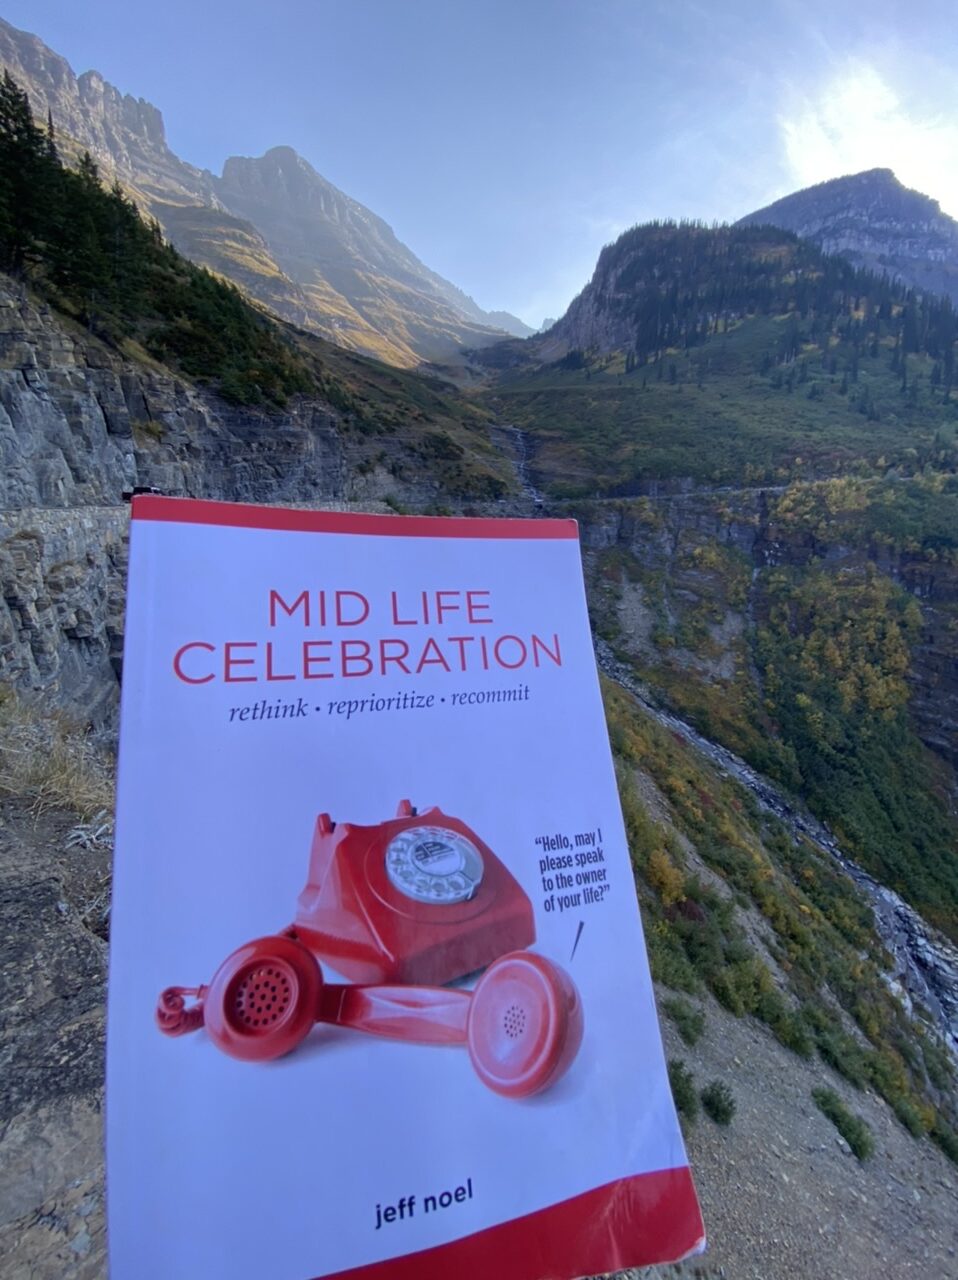 Book entitled mid life celebration with mountains in the background